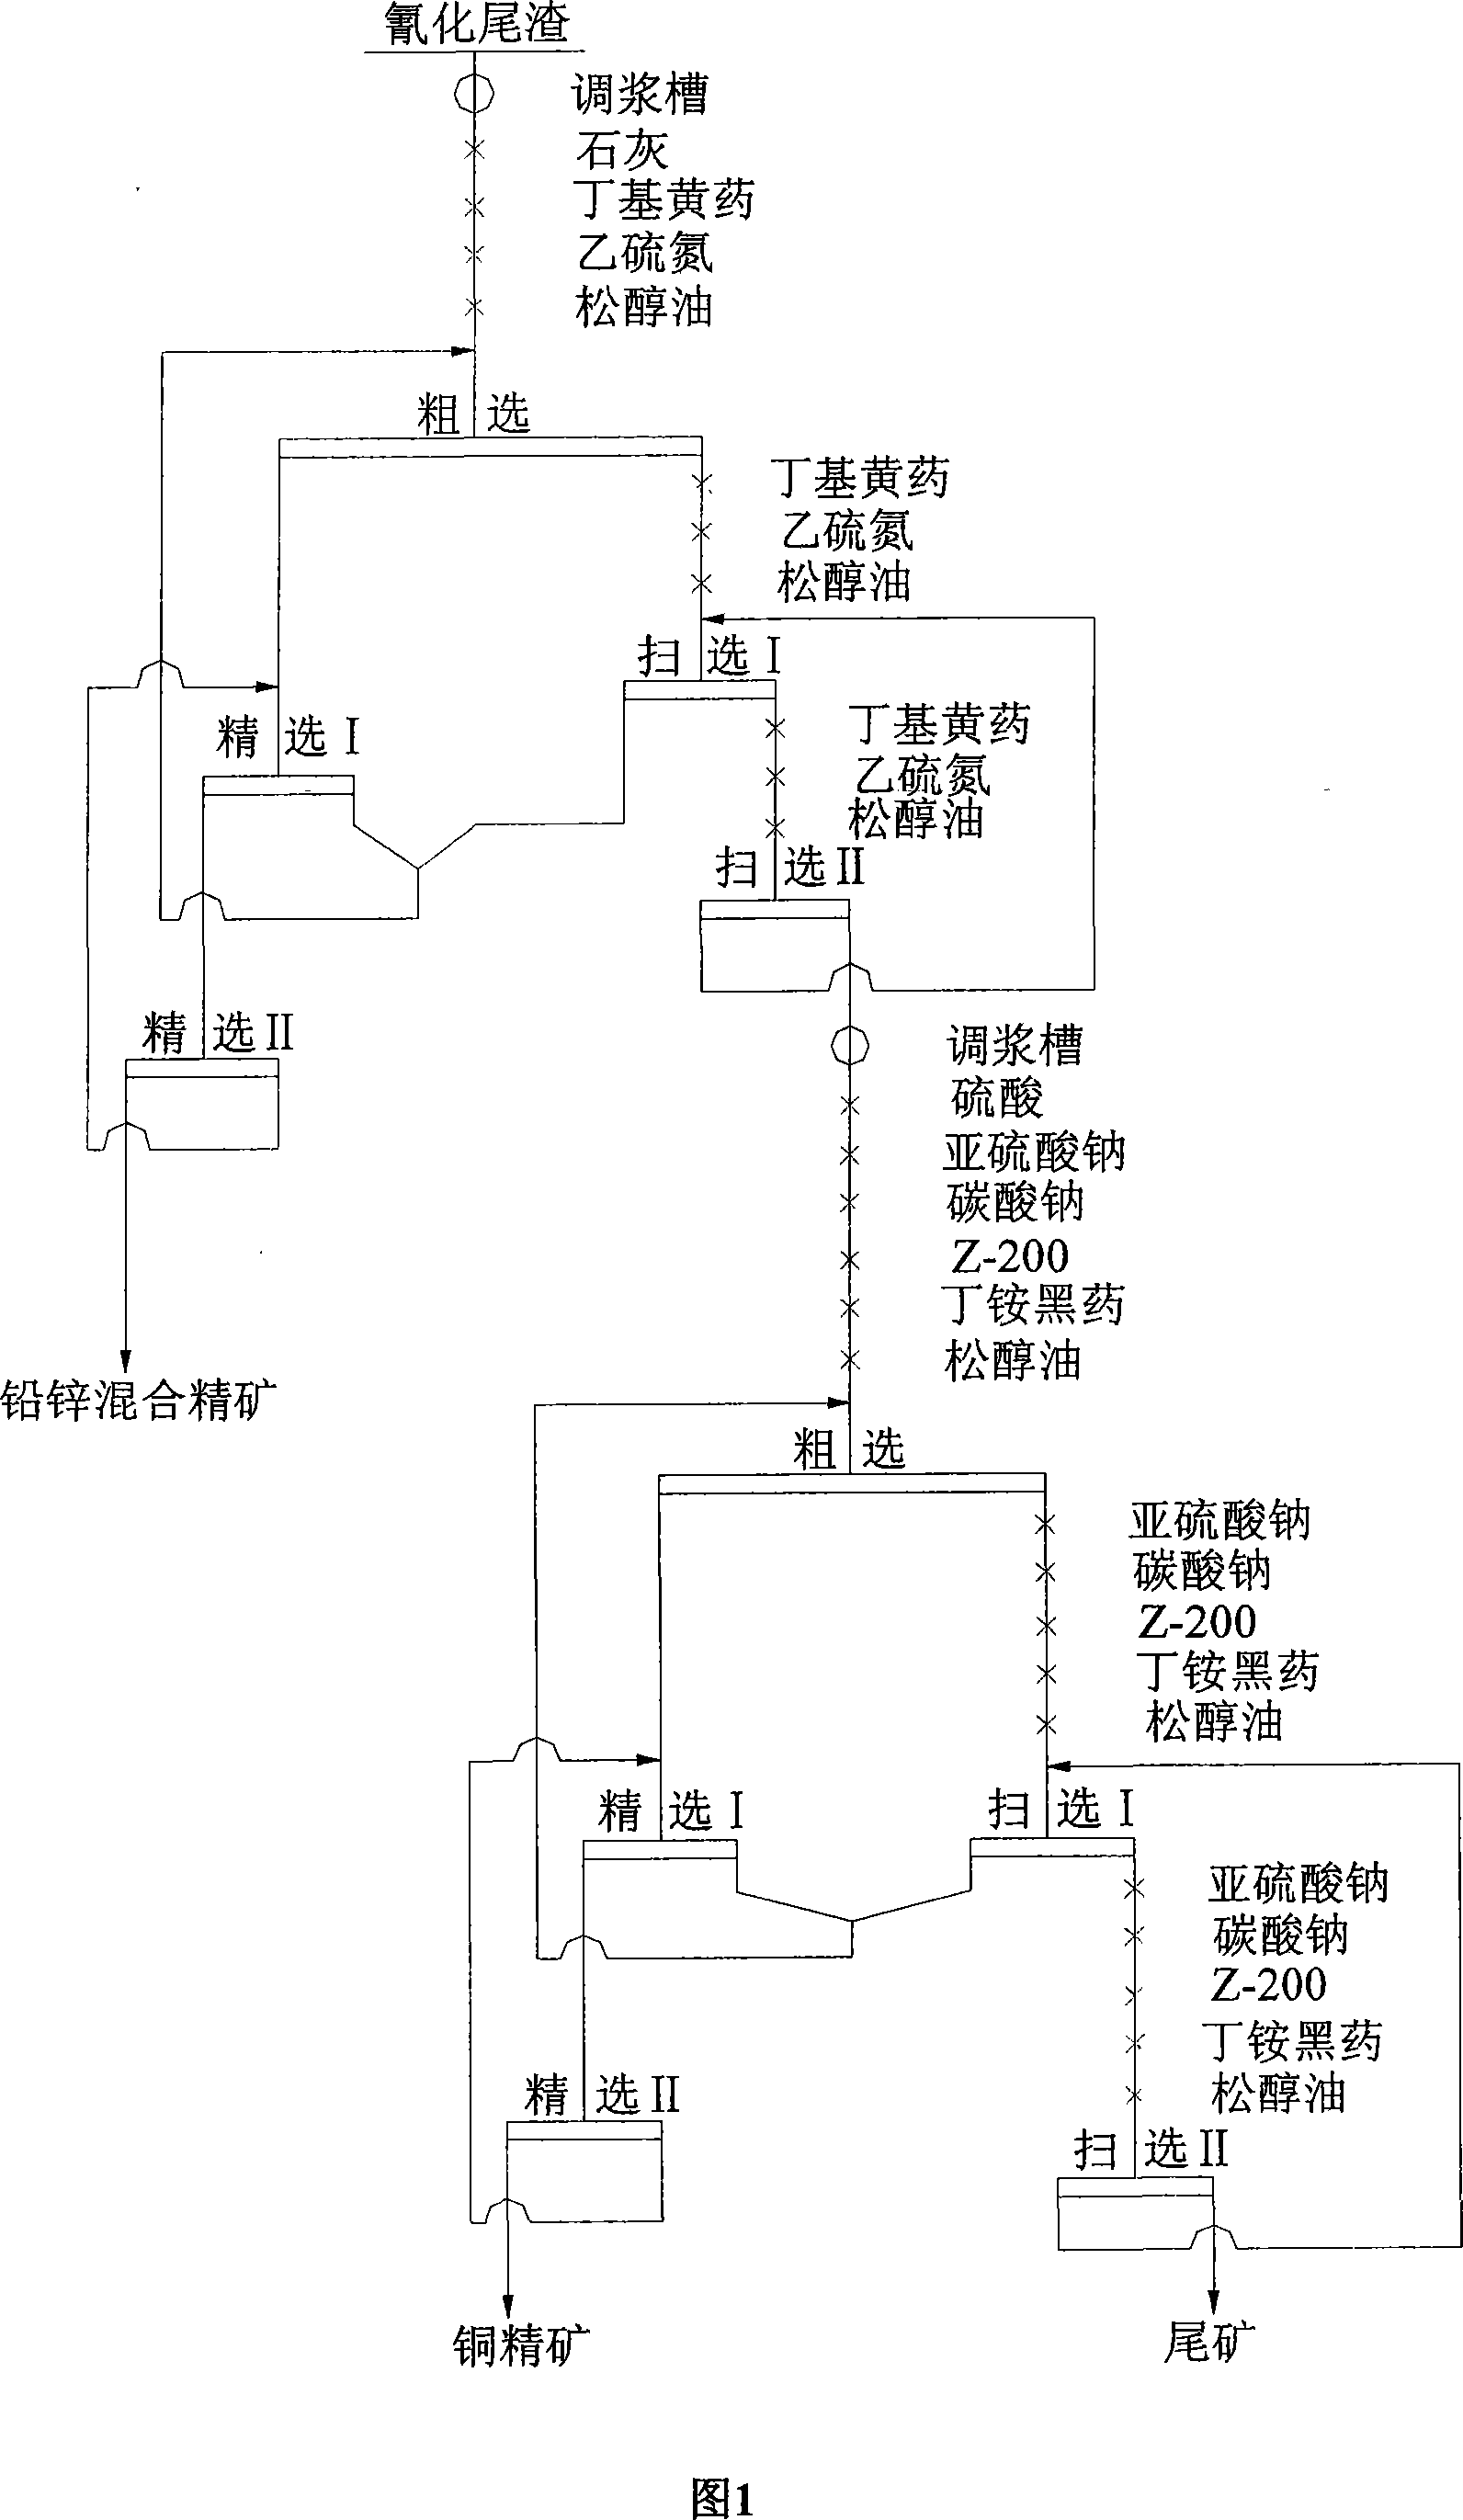 Method for using cyaniding barren solution to float, reclaim and cyaniding copper plumbum and zinc in tailings